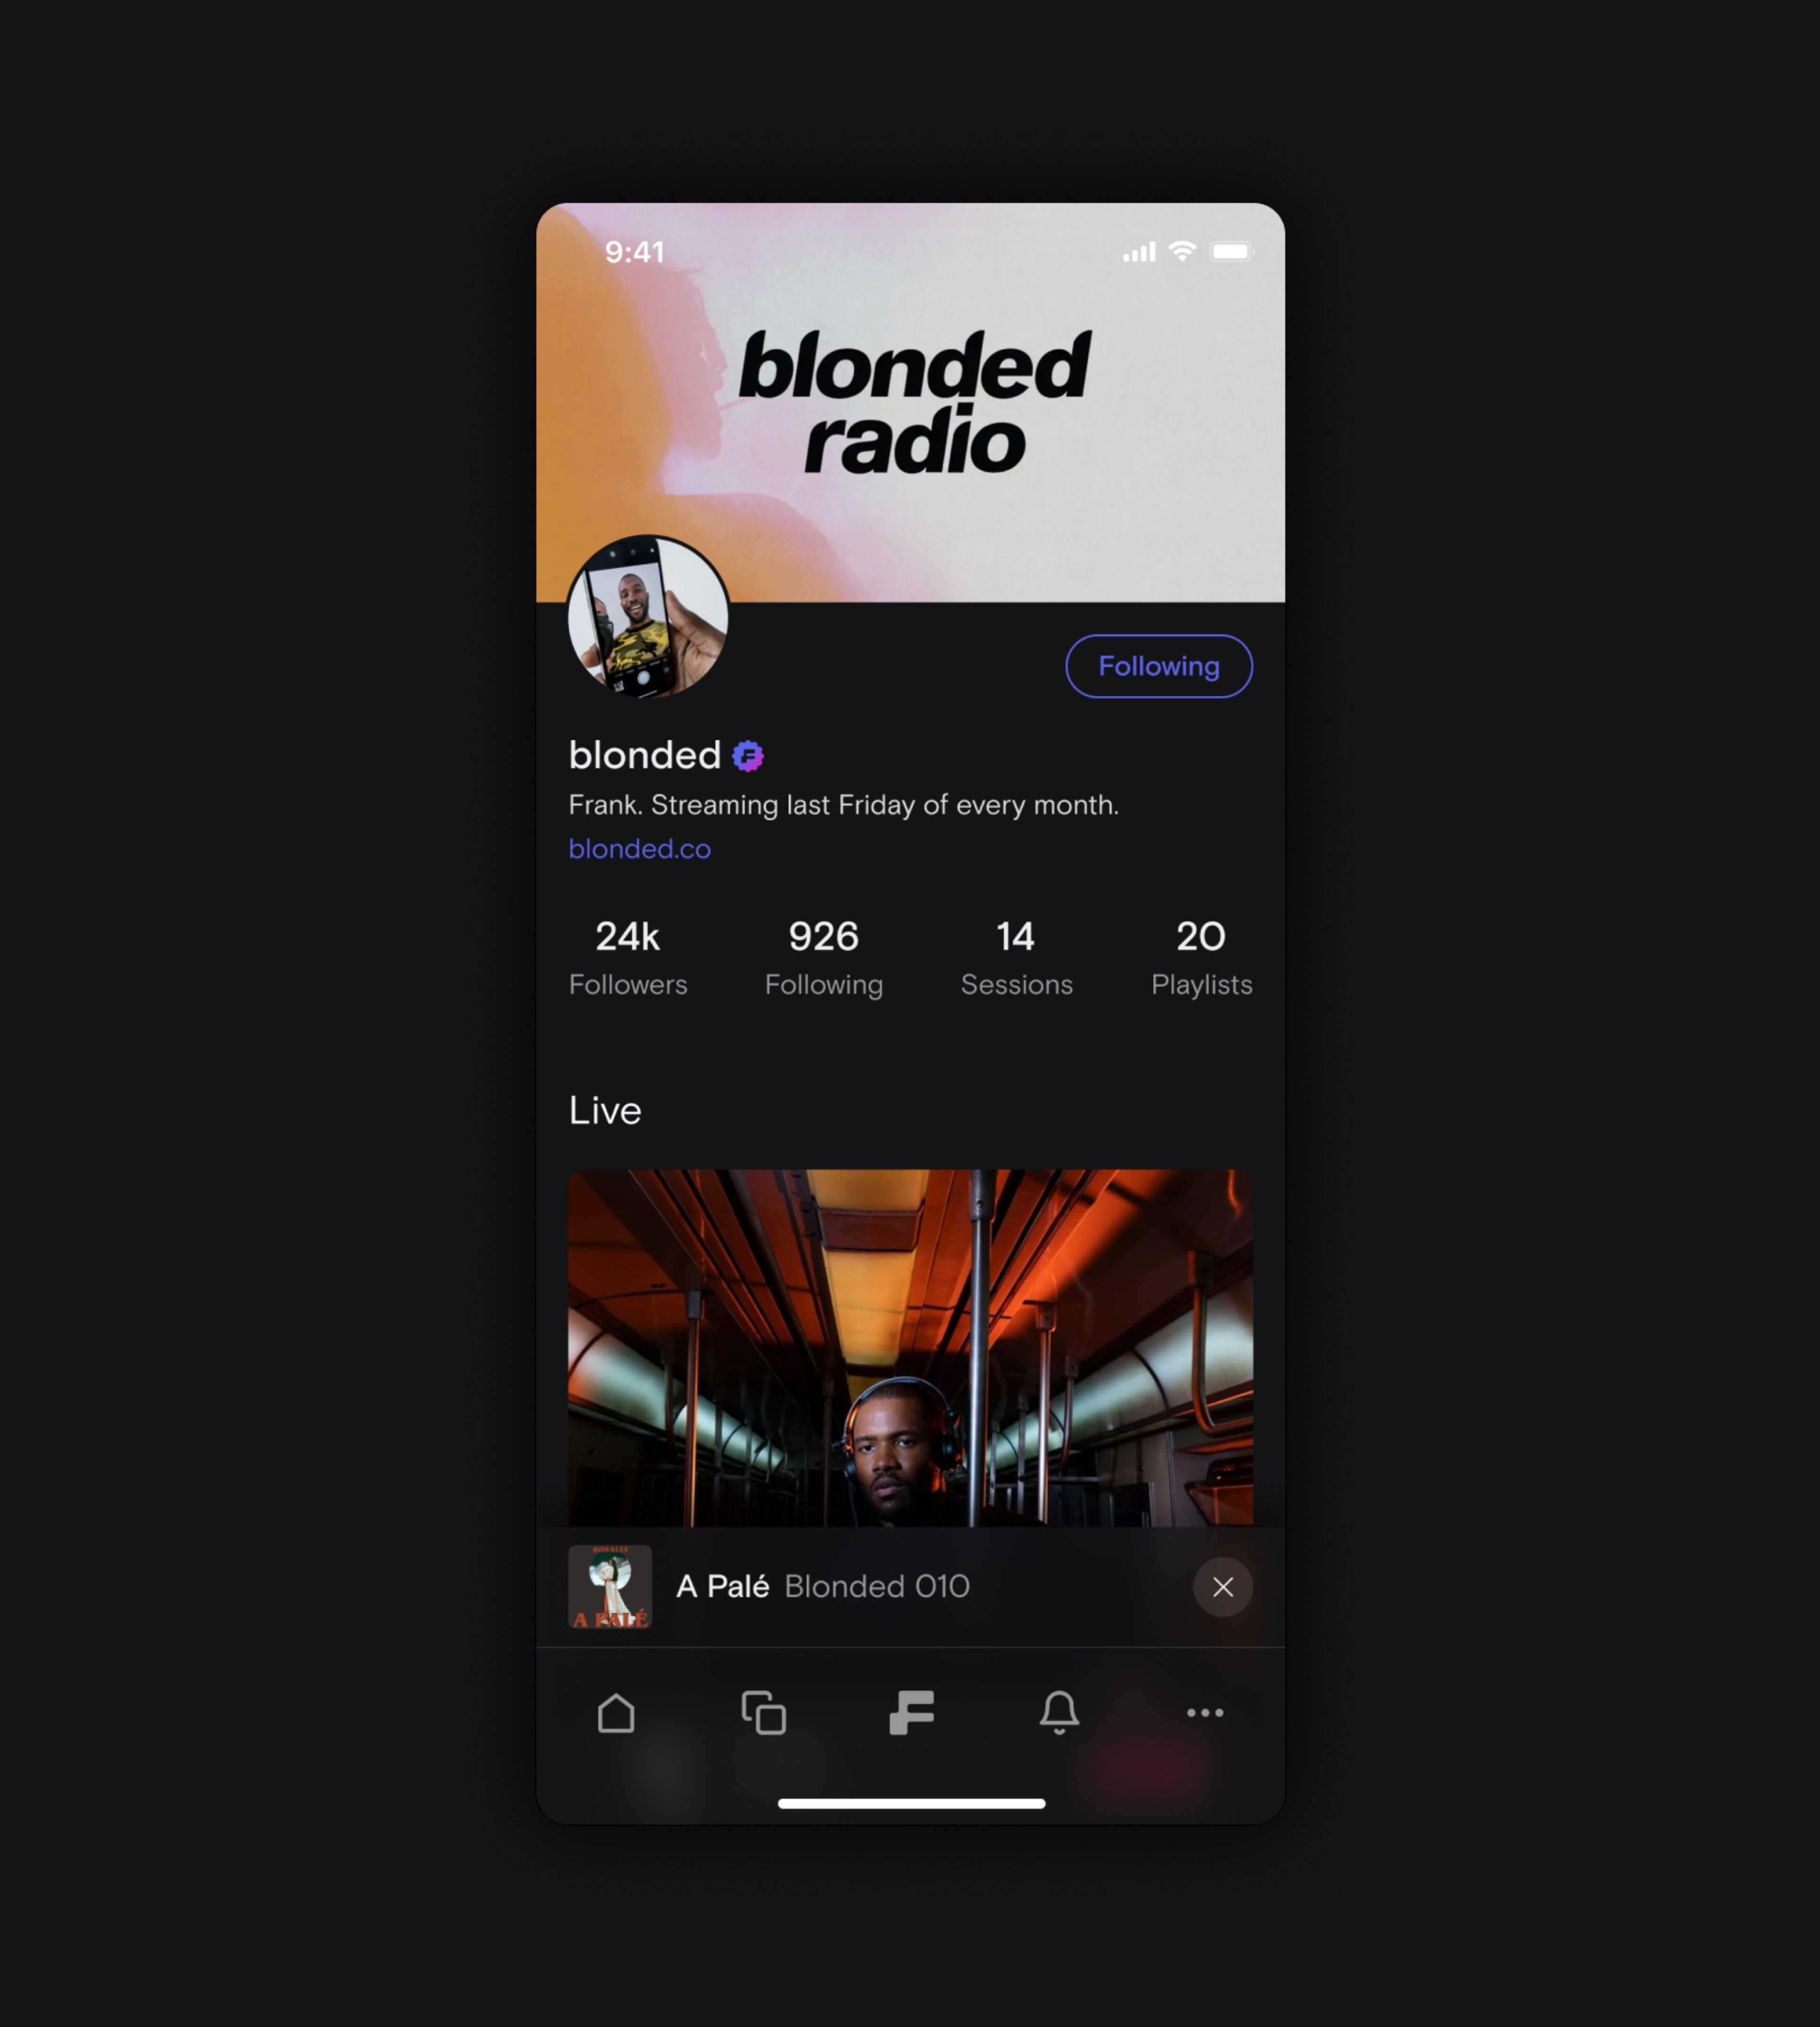 Screenshot of the profile page for a specific artists or DJ. This profile is for the user "blonded" showing their follow count and other analytics as well as their latest stream.